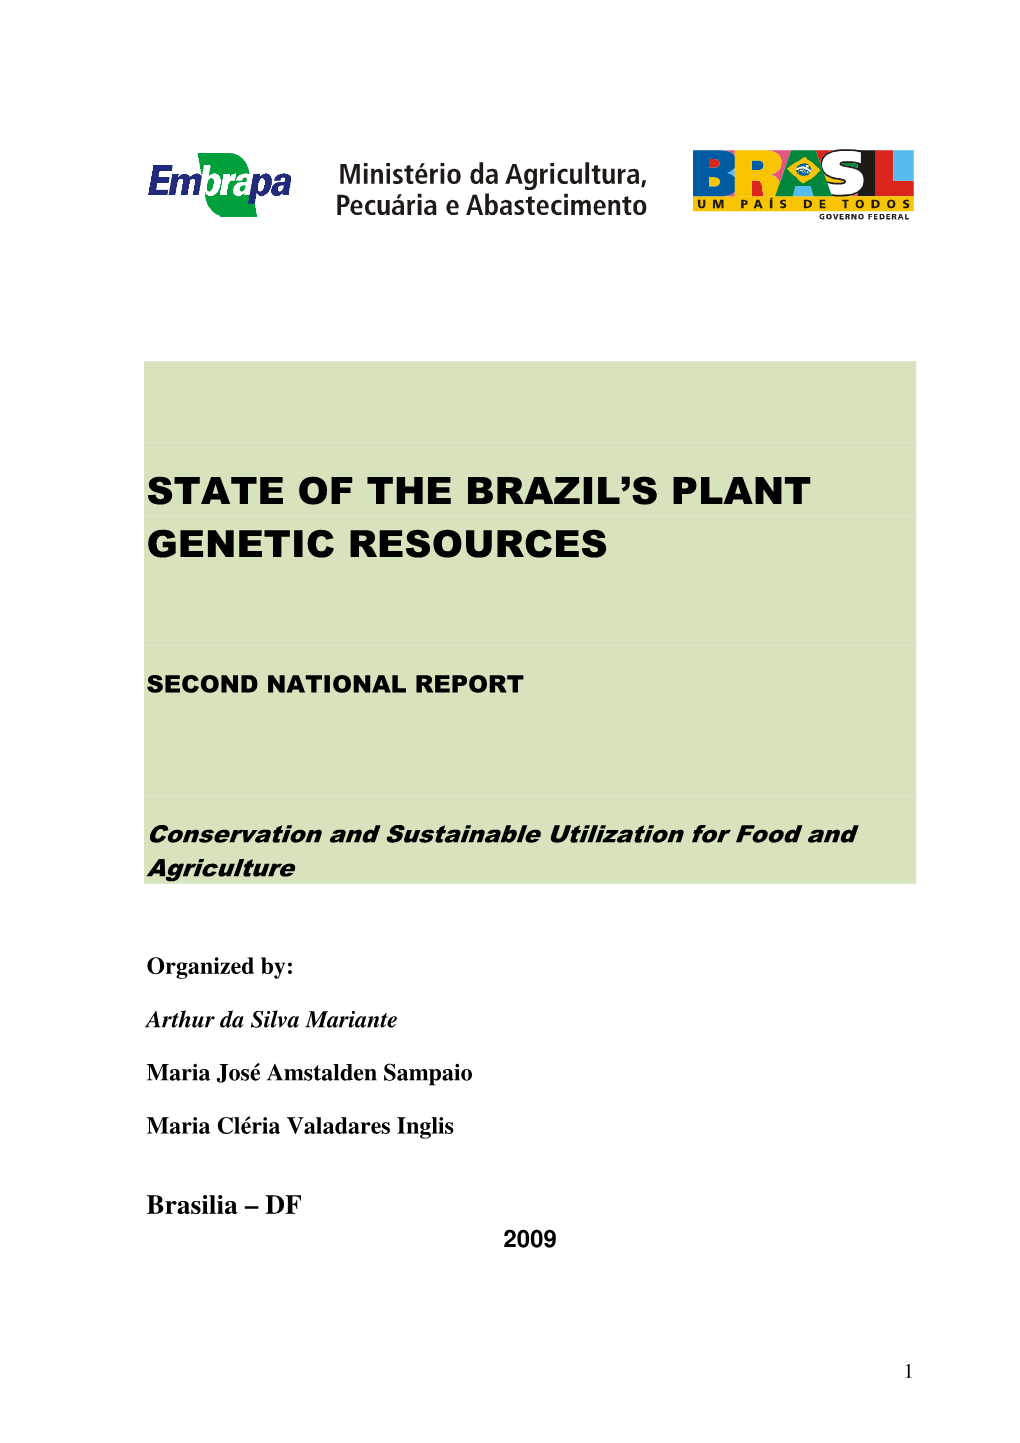 State of the Brazil's Plant Genetic Resources